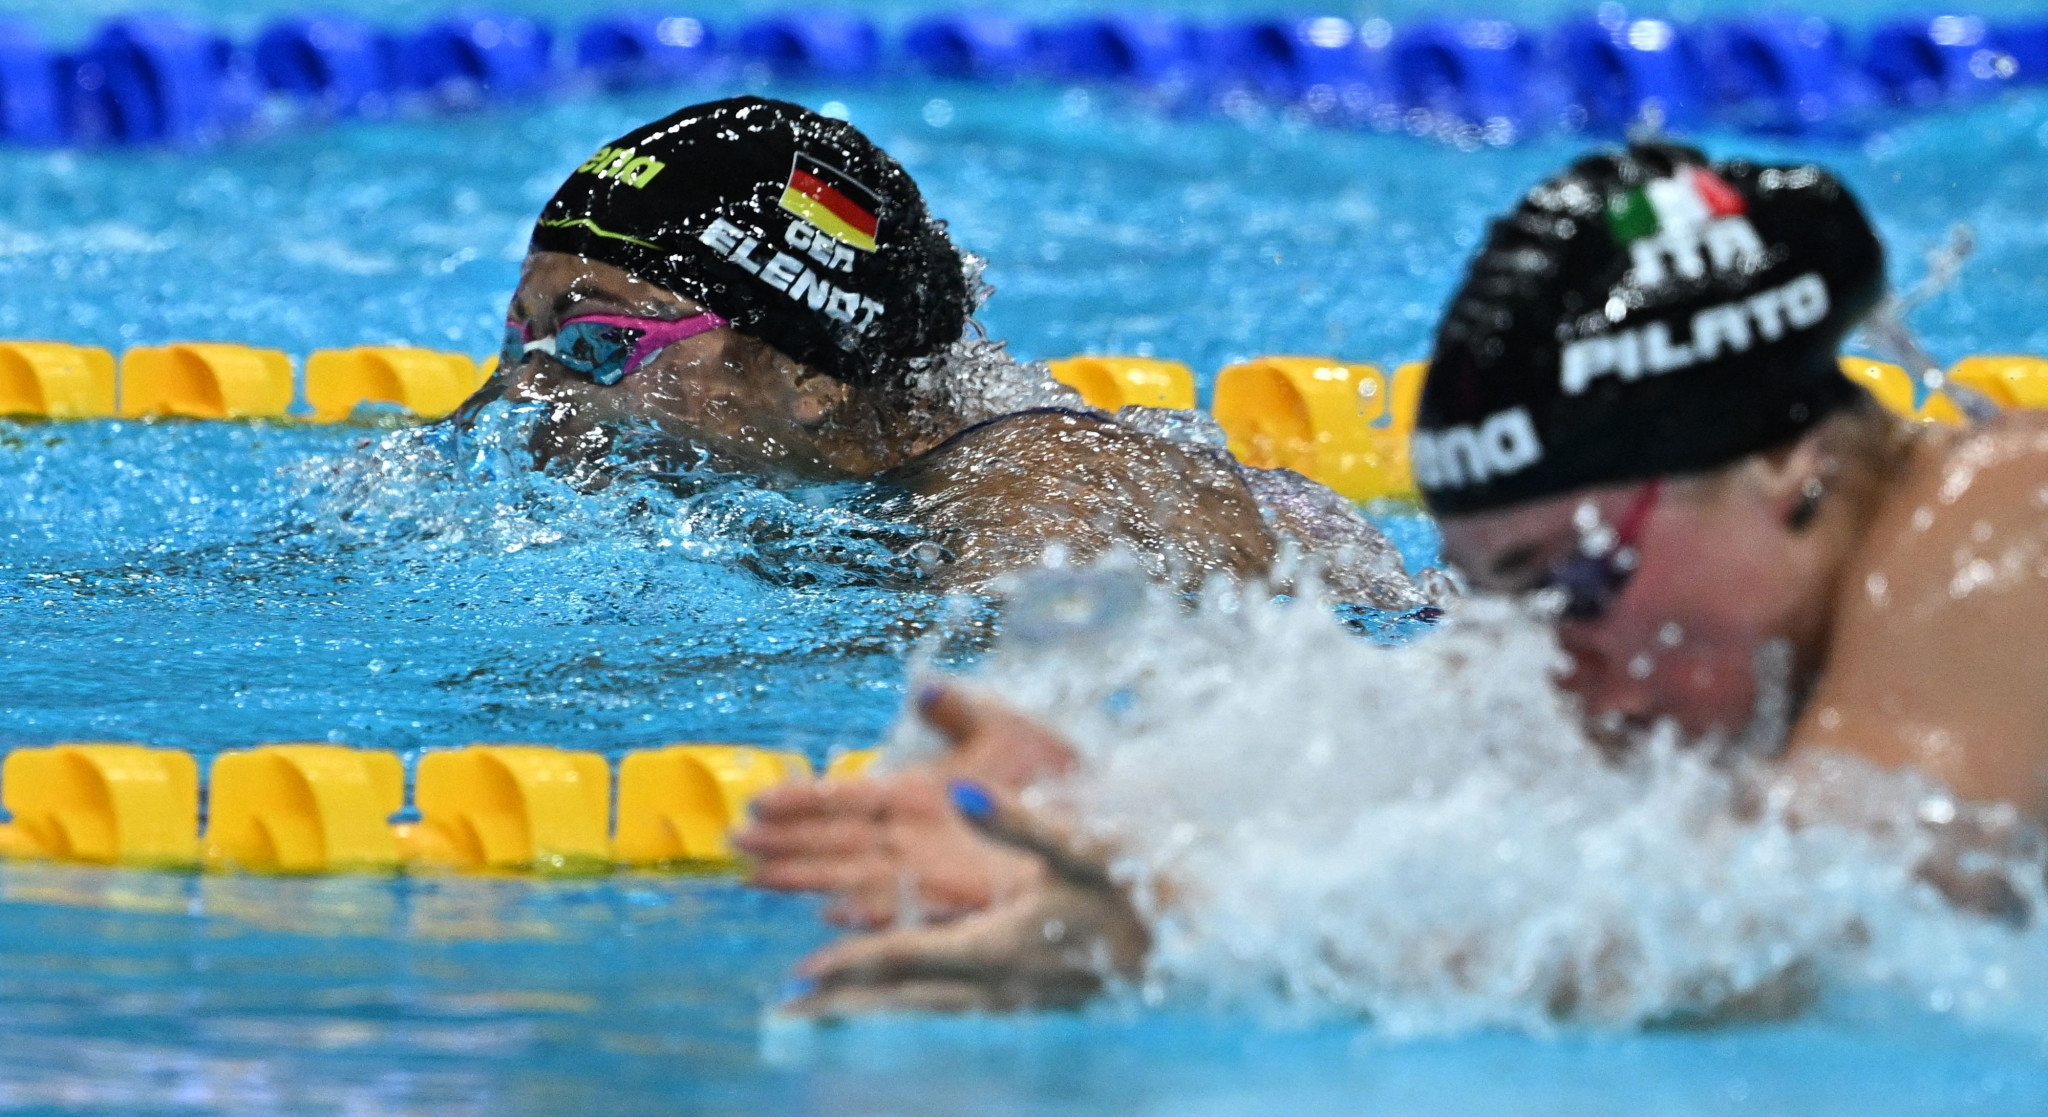 Italy's Benedetta Pilato, right, edged a close battle with Germany's Anna Elendt to take women's 100m breaststroke gold ©Getty Images